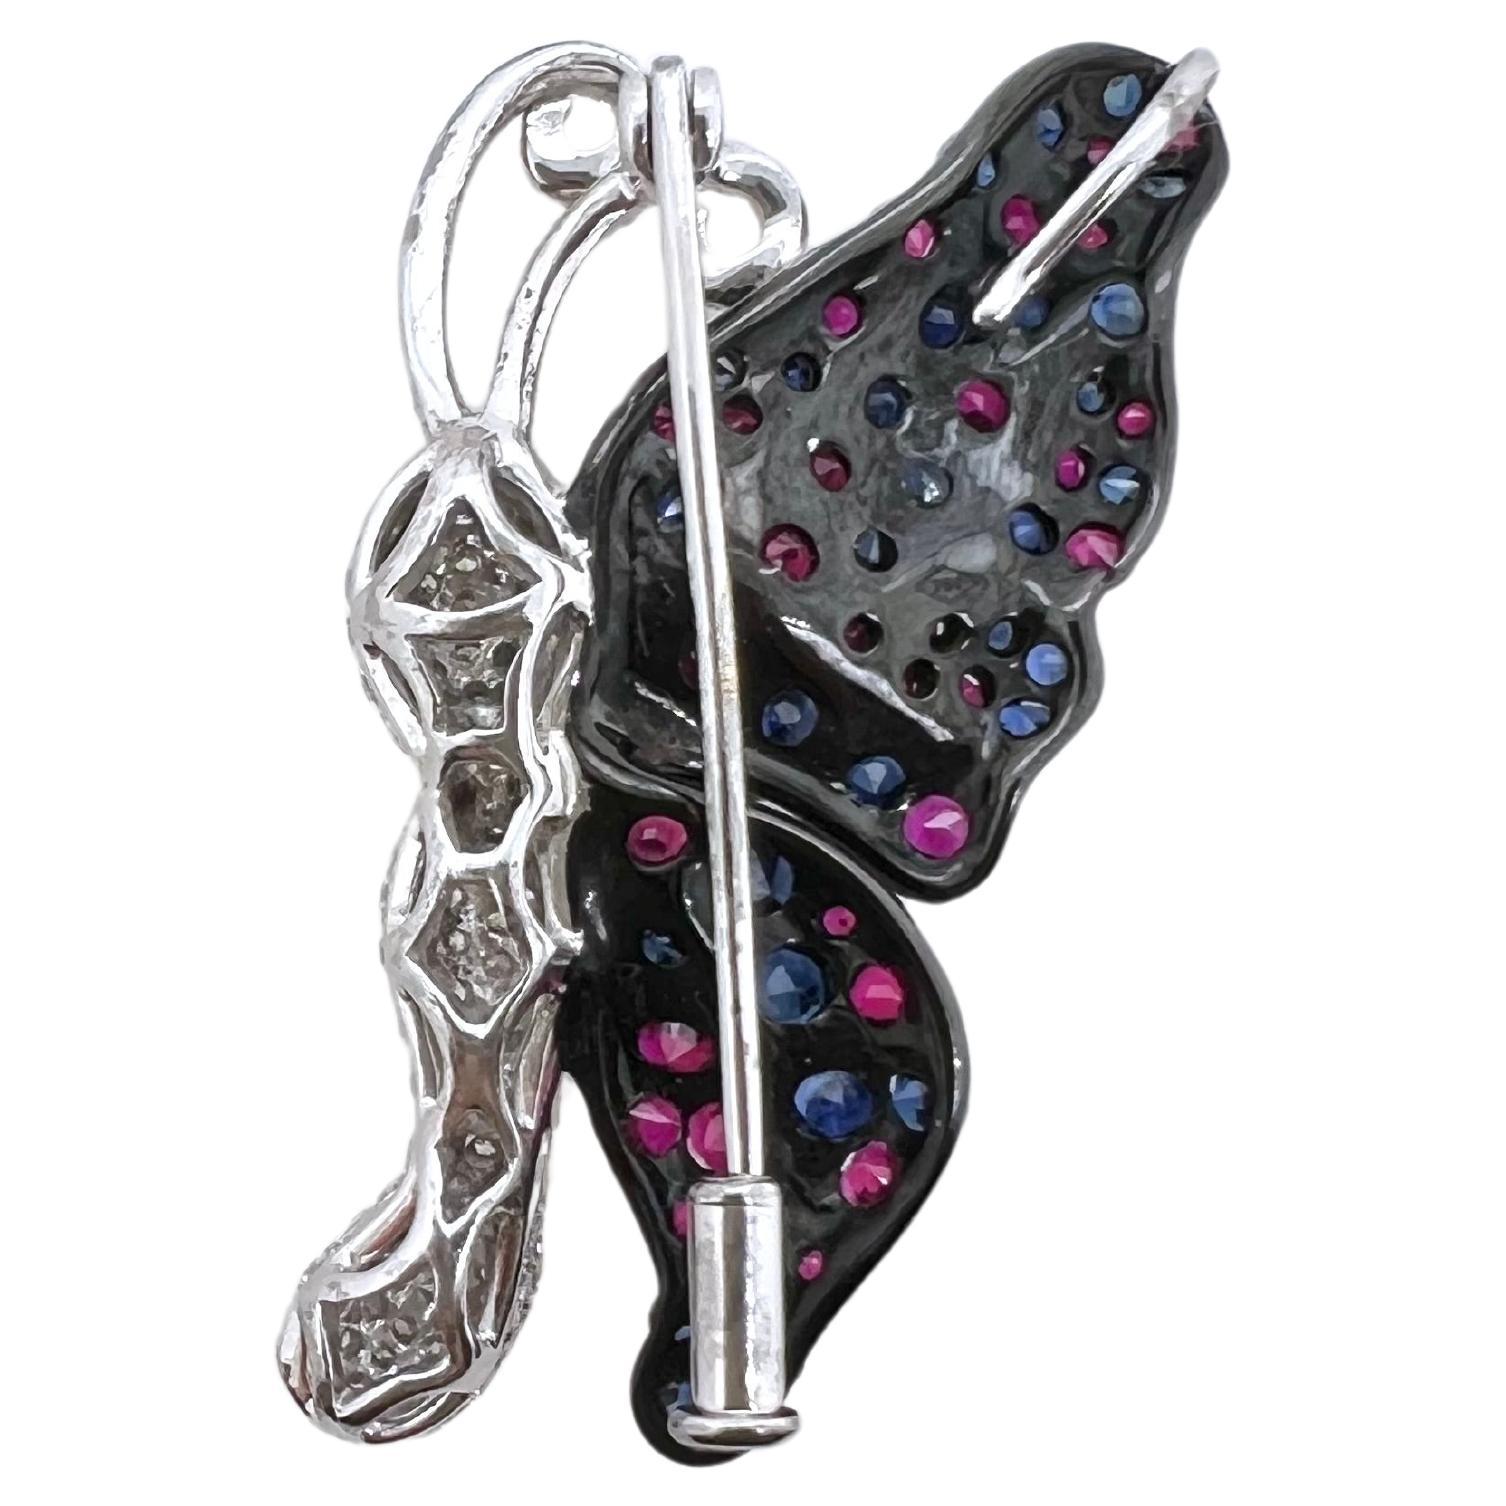 This 3 dimensional butterfly brooch and pendant is a piece of art! The vibrant blue sapphires and rubies that make up the wings are set behind the bright, white round brilliant diamonds to give a dramatic contrast! The versatility of the butterfly